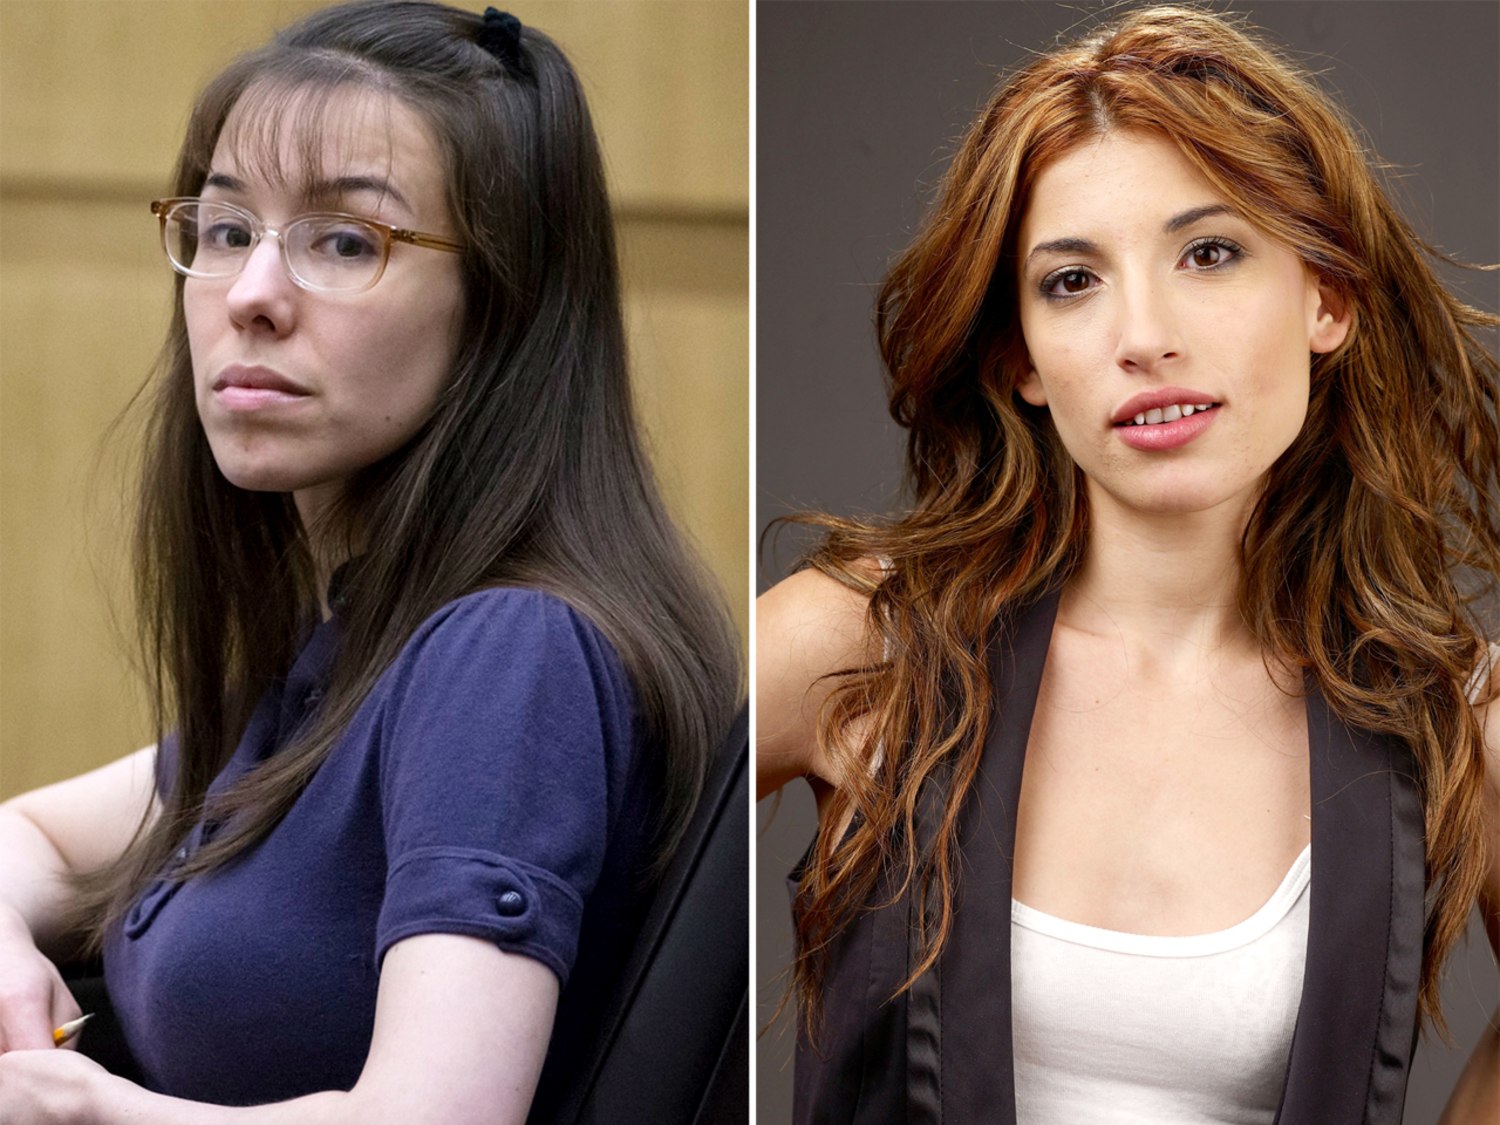 charity abendano share jodi arias sex pictures photos